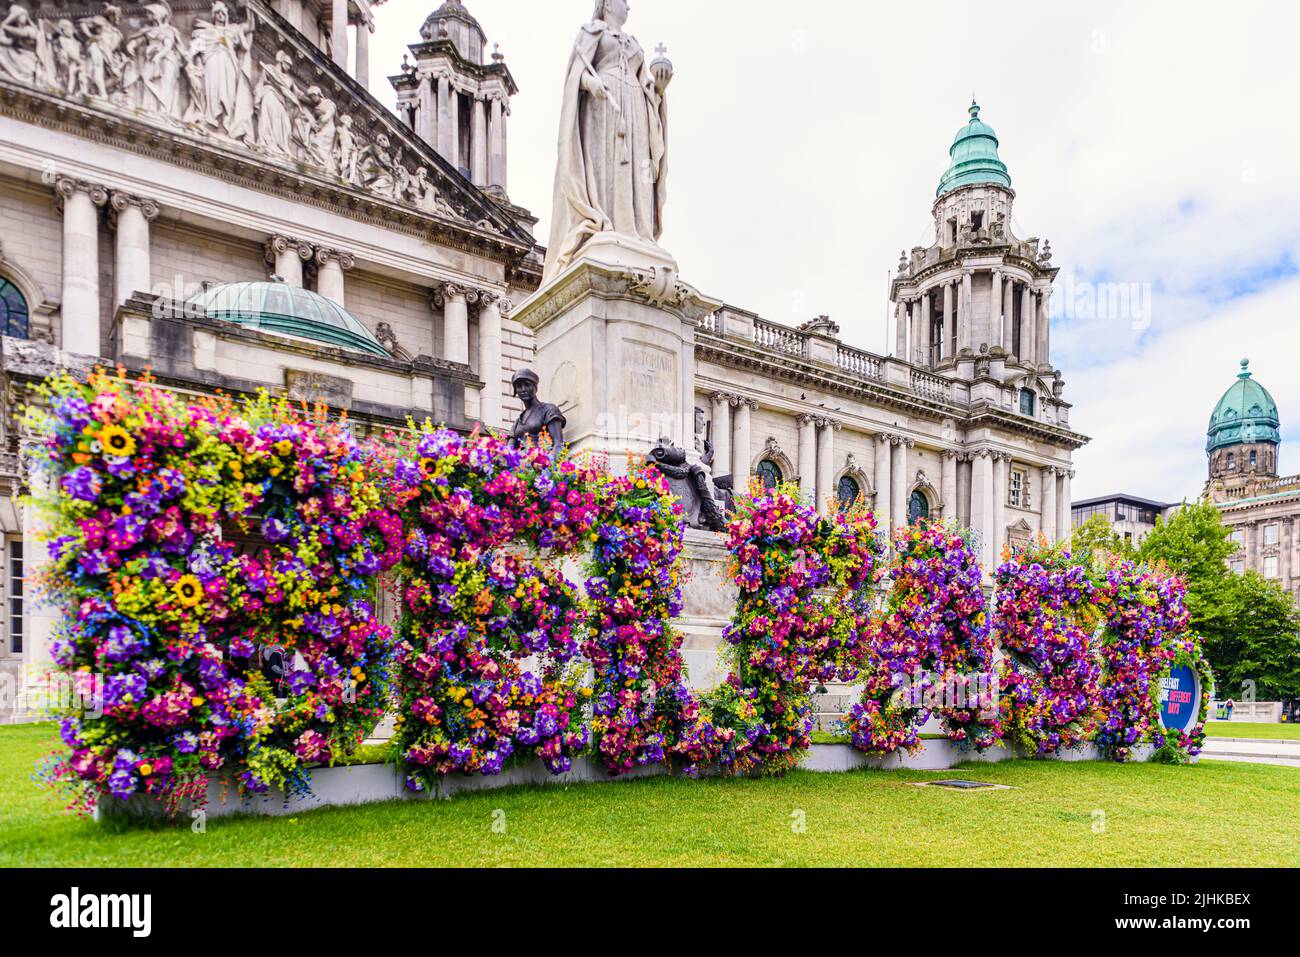 Floral flowers display spelling out 'BELFAST' in the grounds of Belfast City Hall, Northern Ireland, United Kingdom, UK Stock Photo